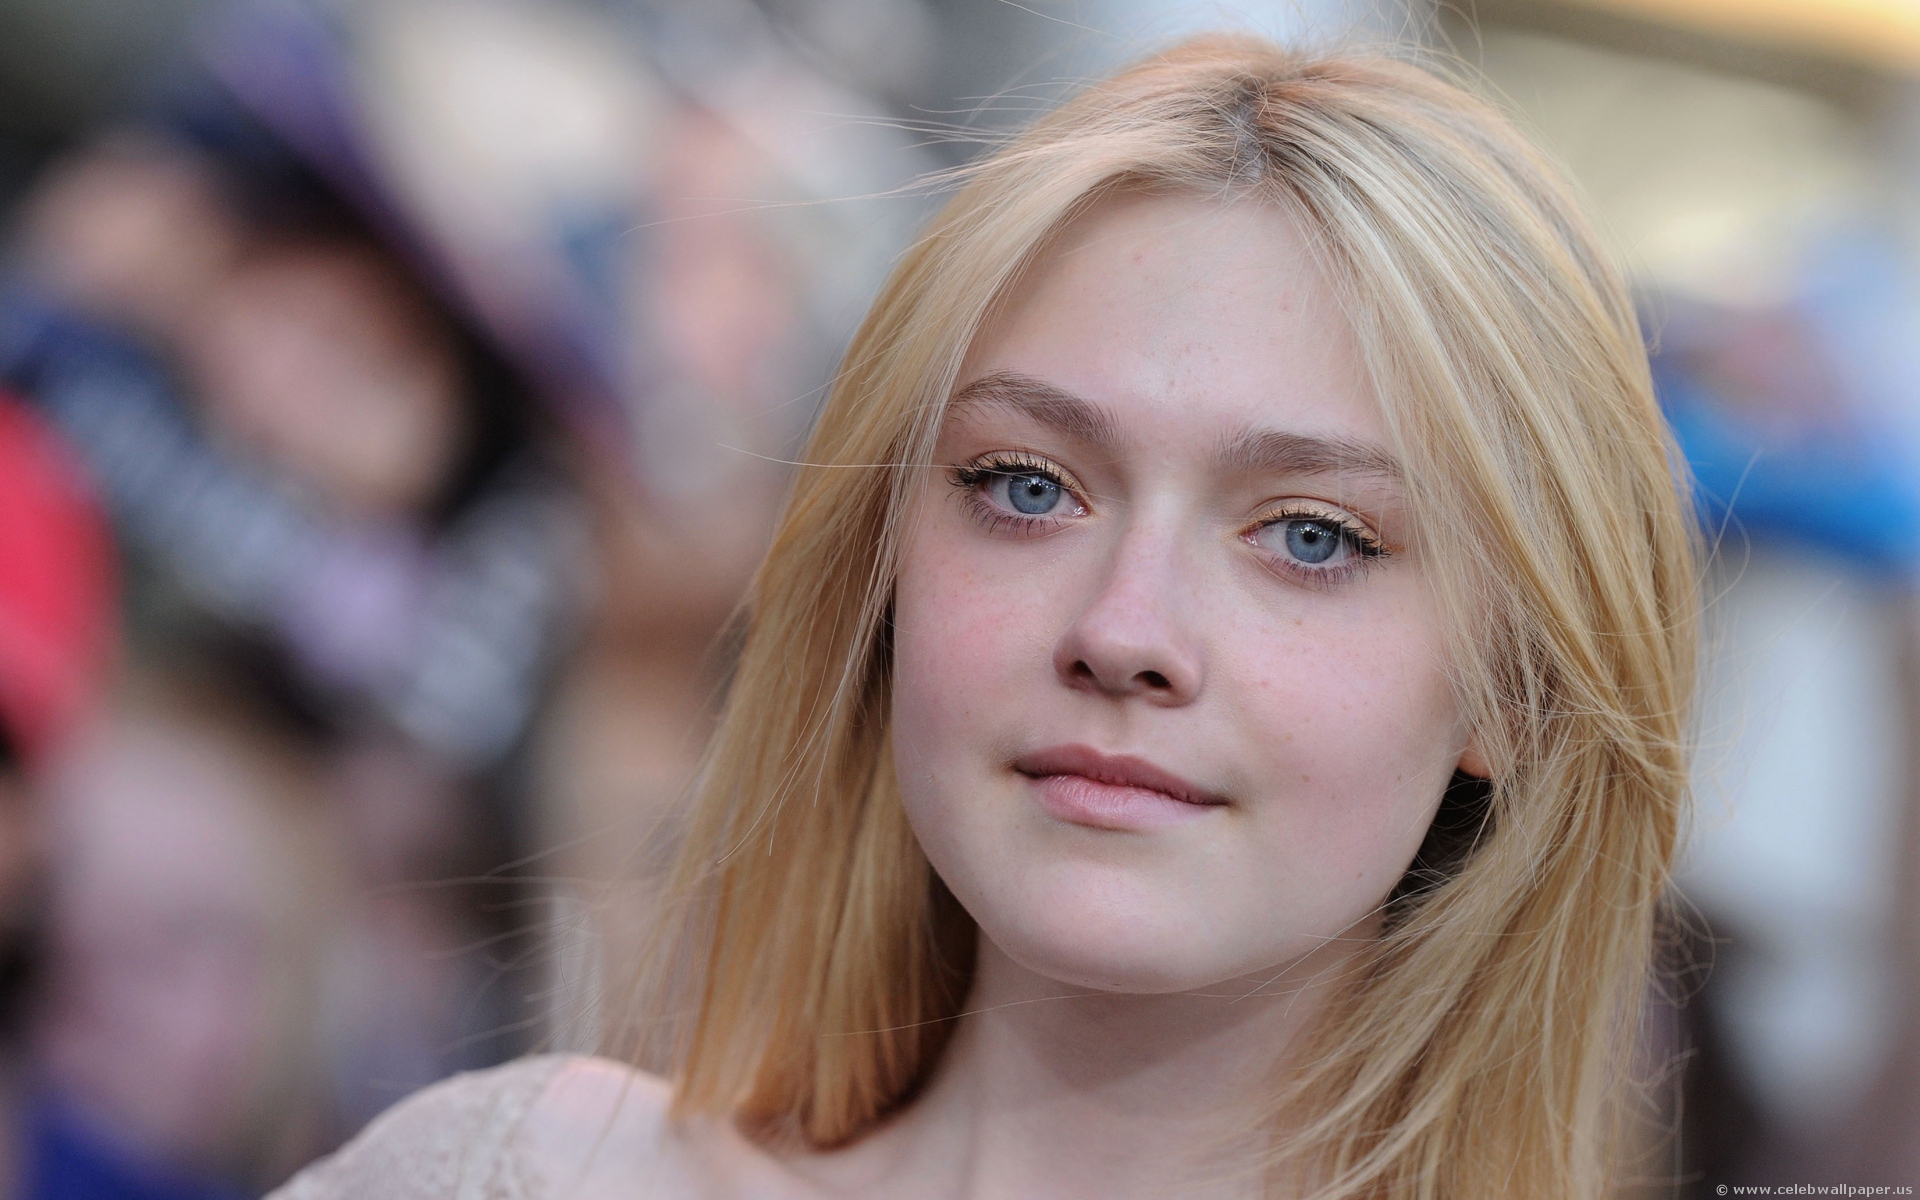 I'm not sure when Dakota Fanning will make the transition to being considered a serious actress, but this is a decent first step.